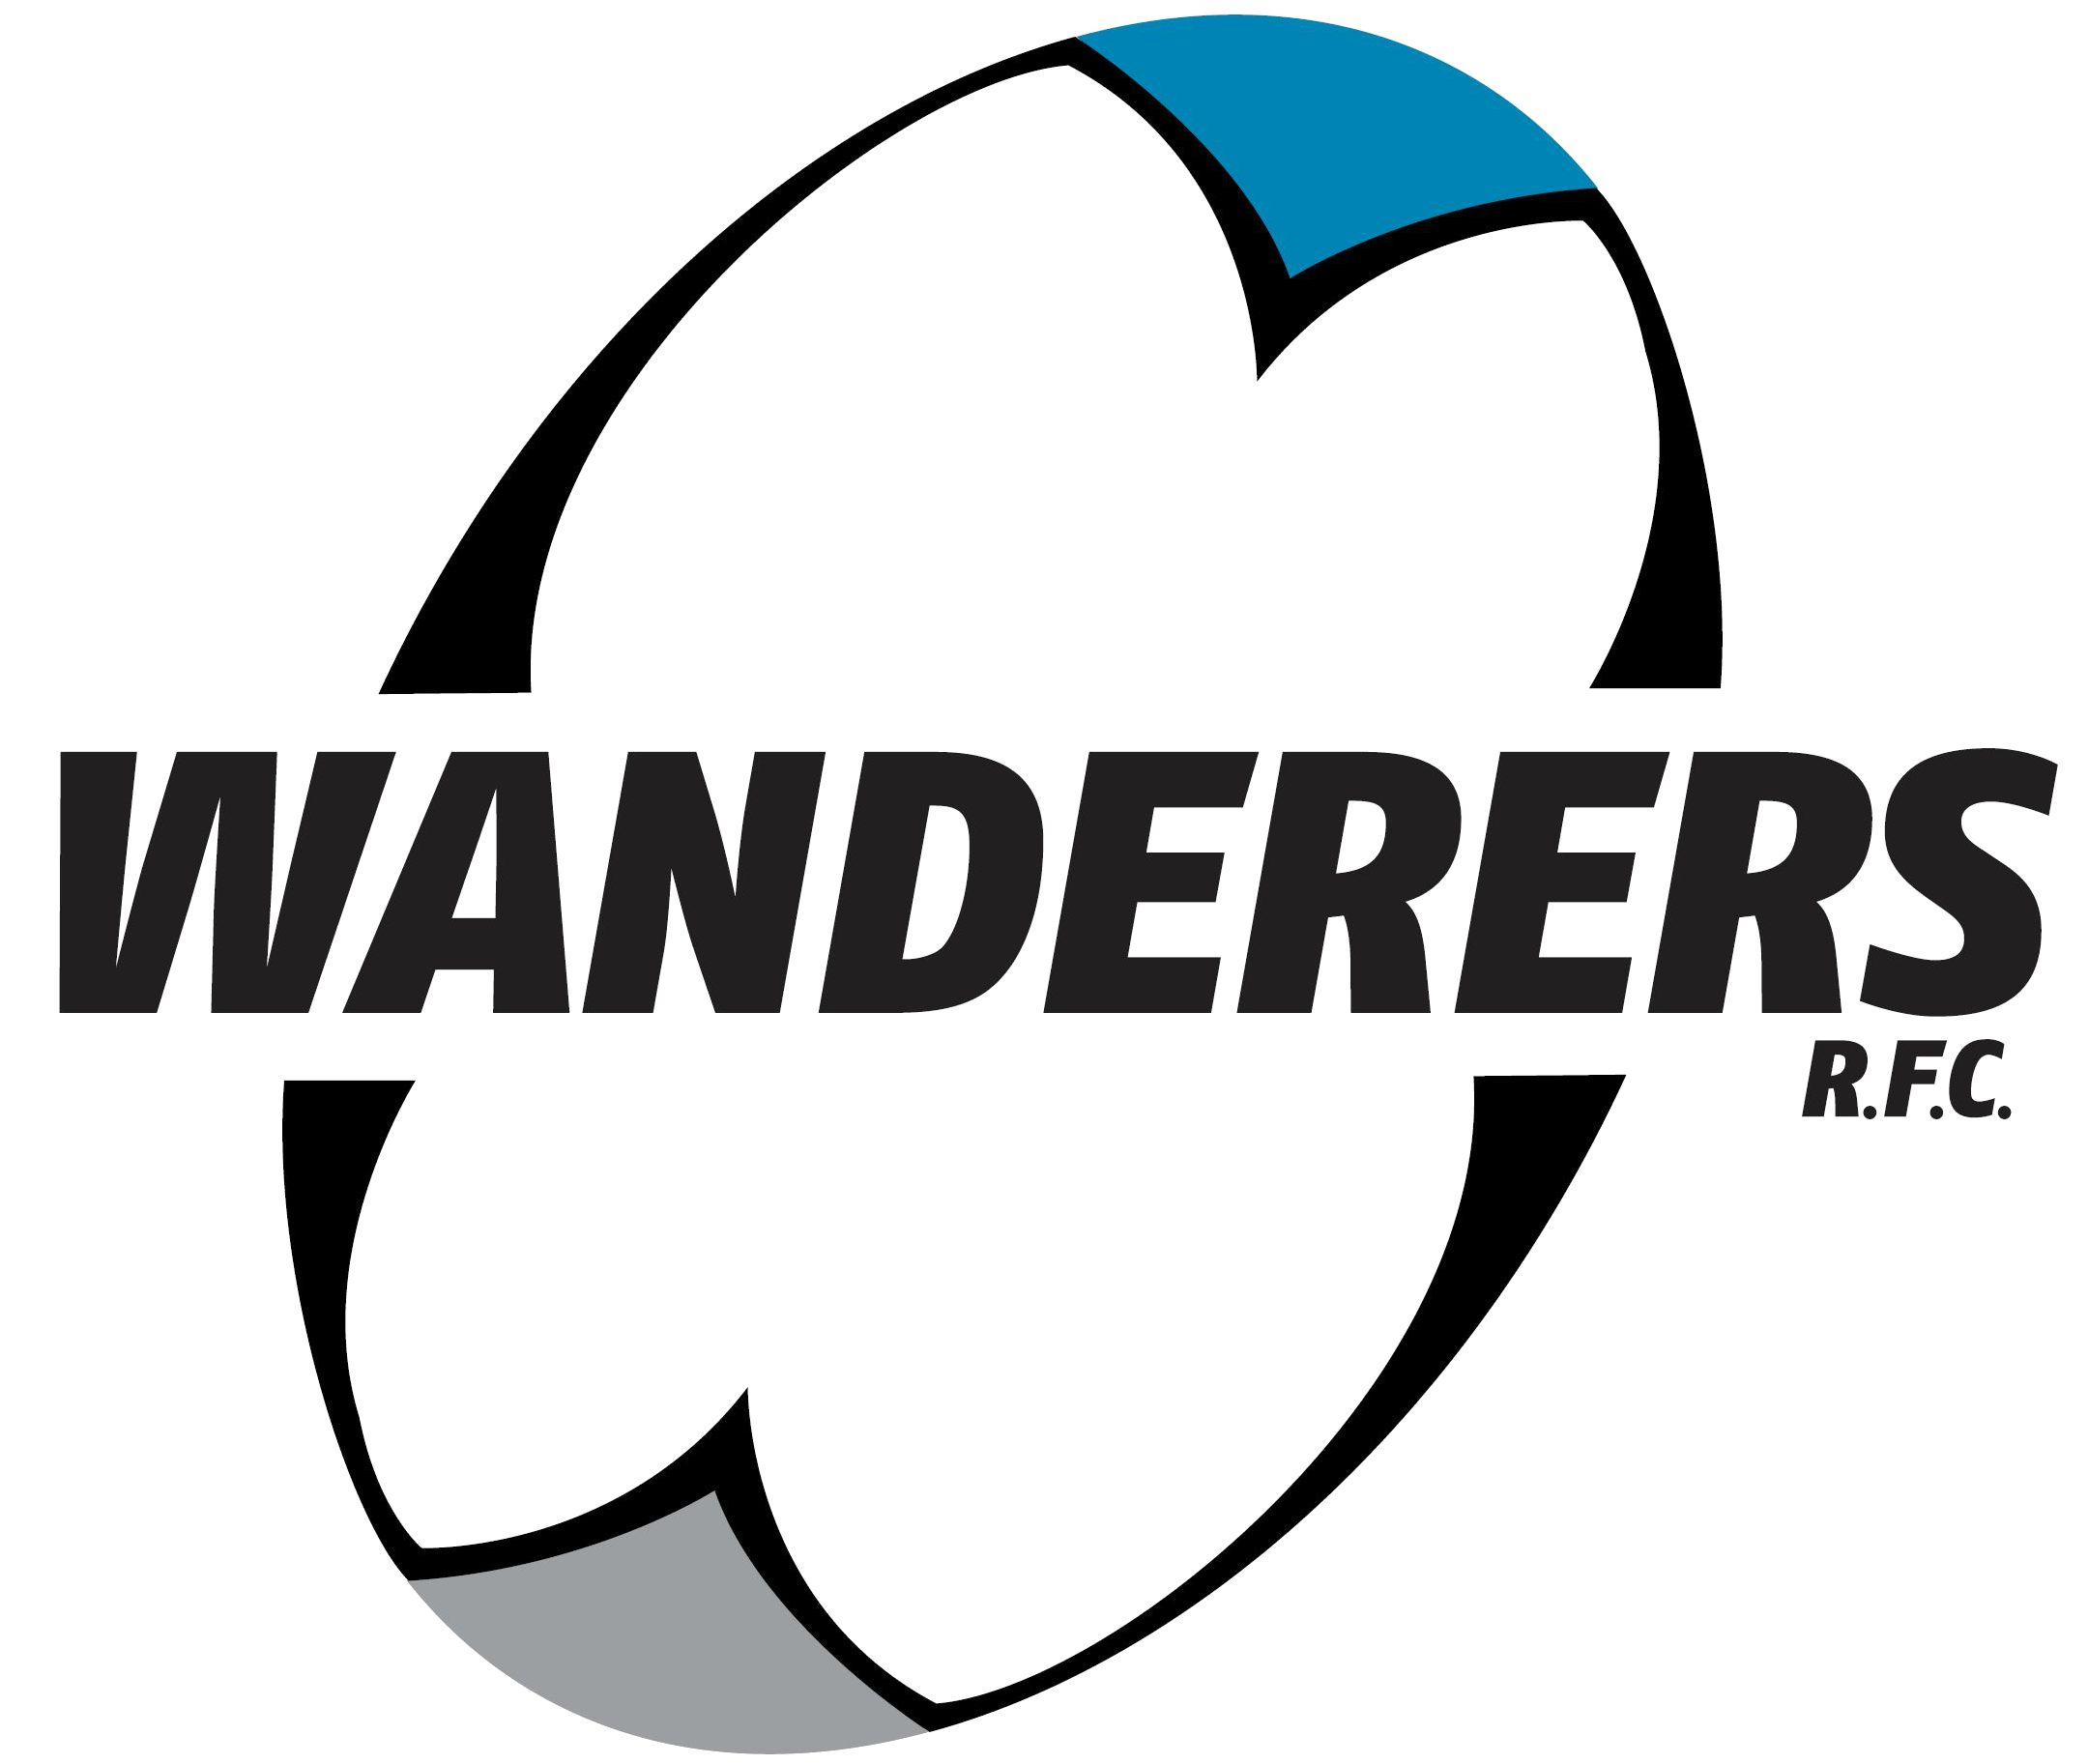 Montreal Wanderers Rugby Club